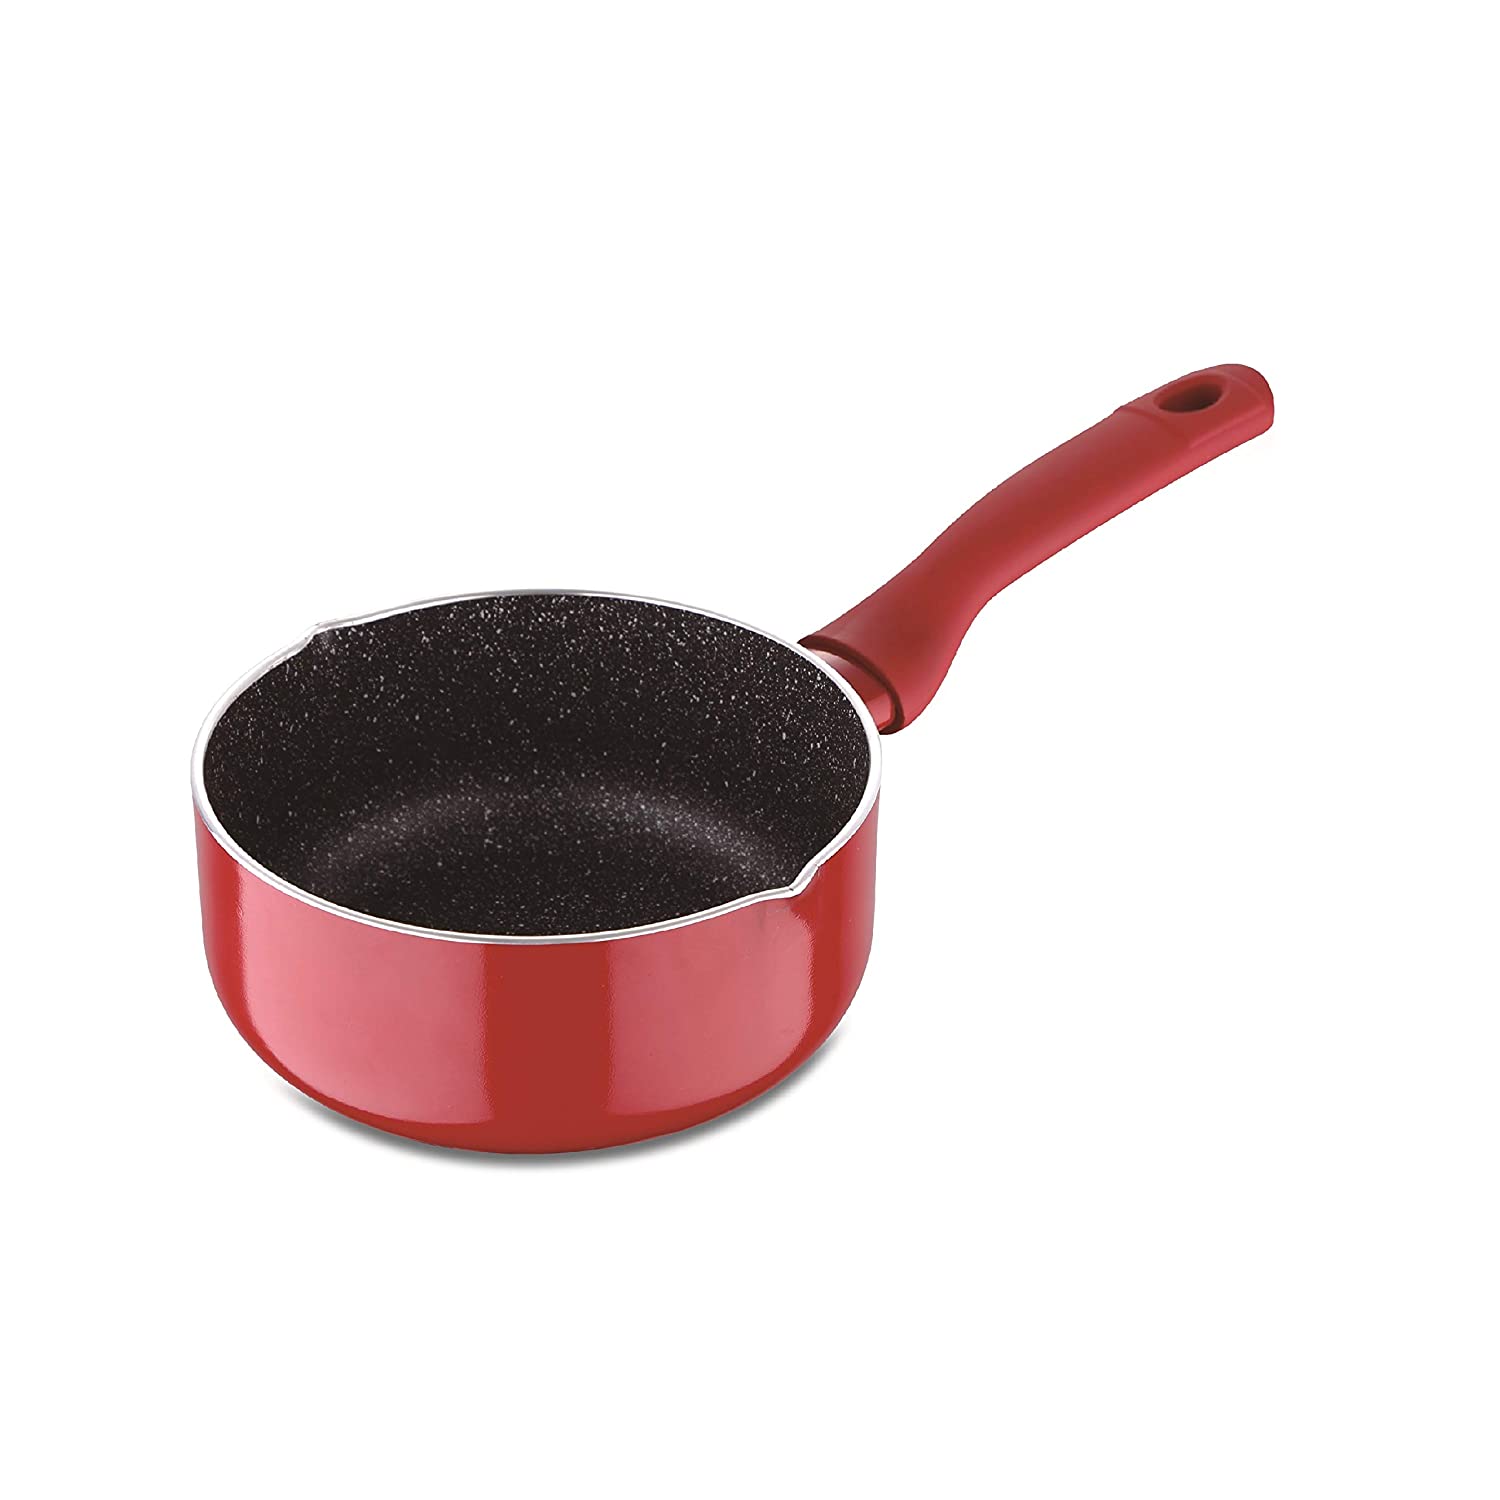 Bergner Red Colour Bellini Plus Non-Stick Sauce Pan in 18 cm size and 2.35 Ltr capacity